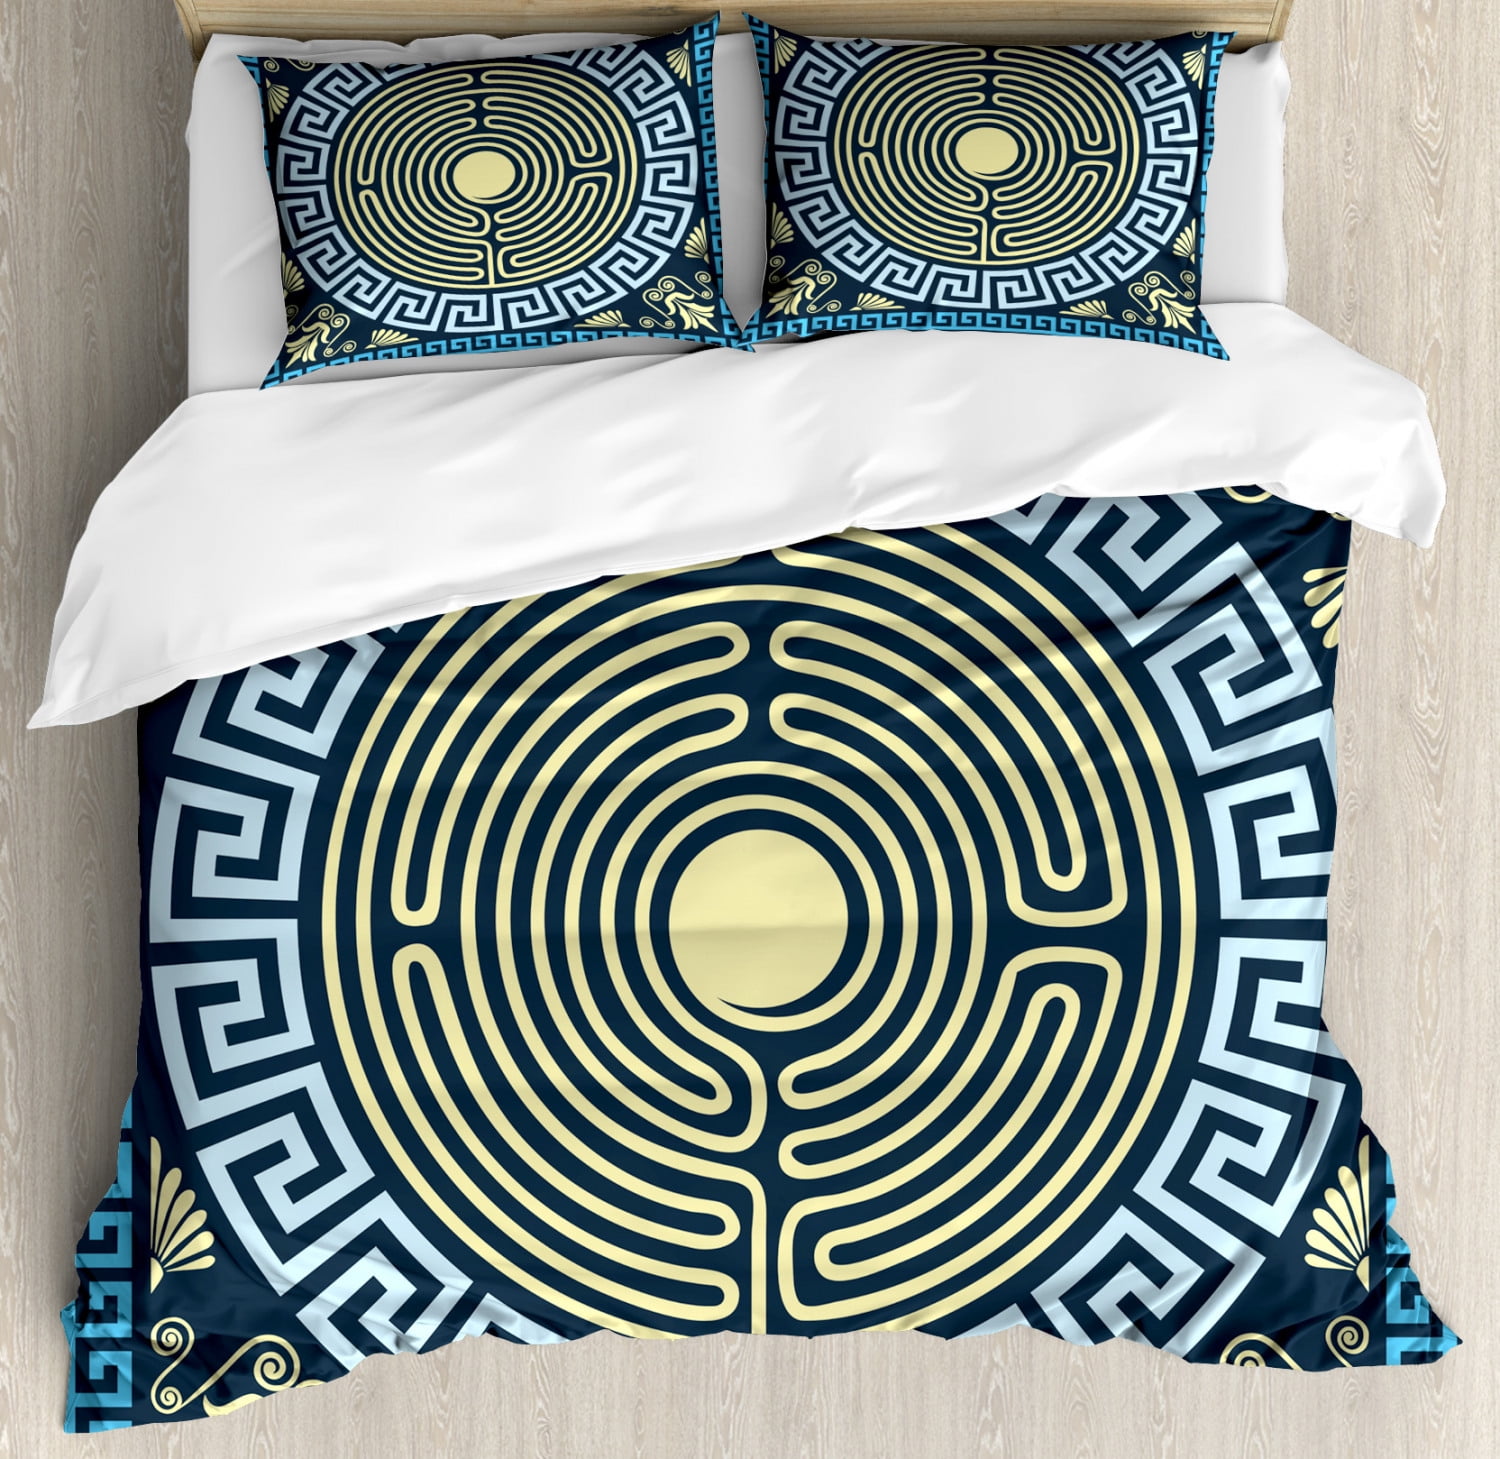 Greek Key Duvet Cover Set Yellow And Blue Labyrinth Pattern From